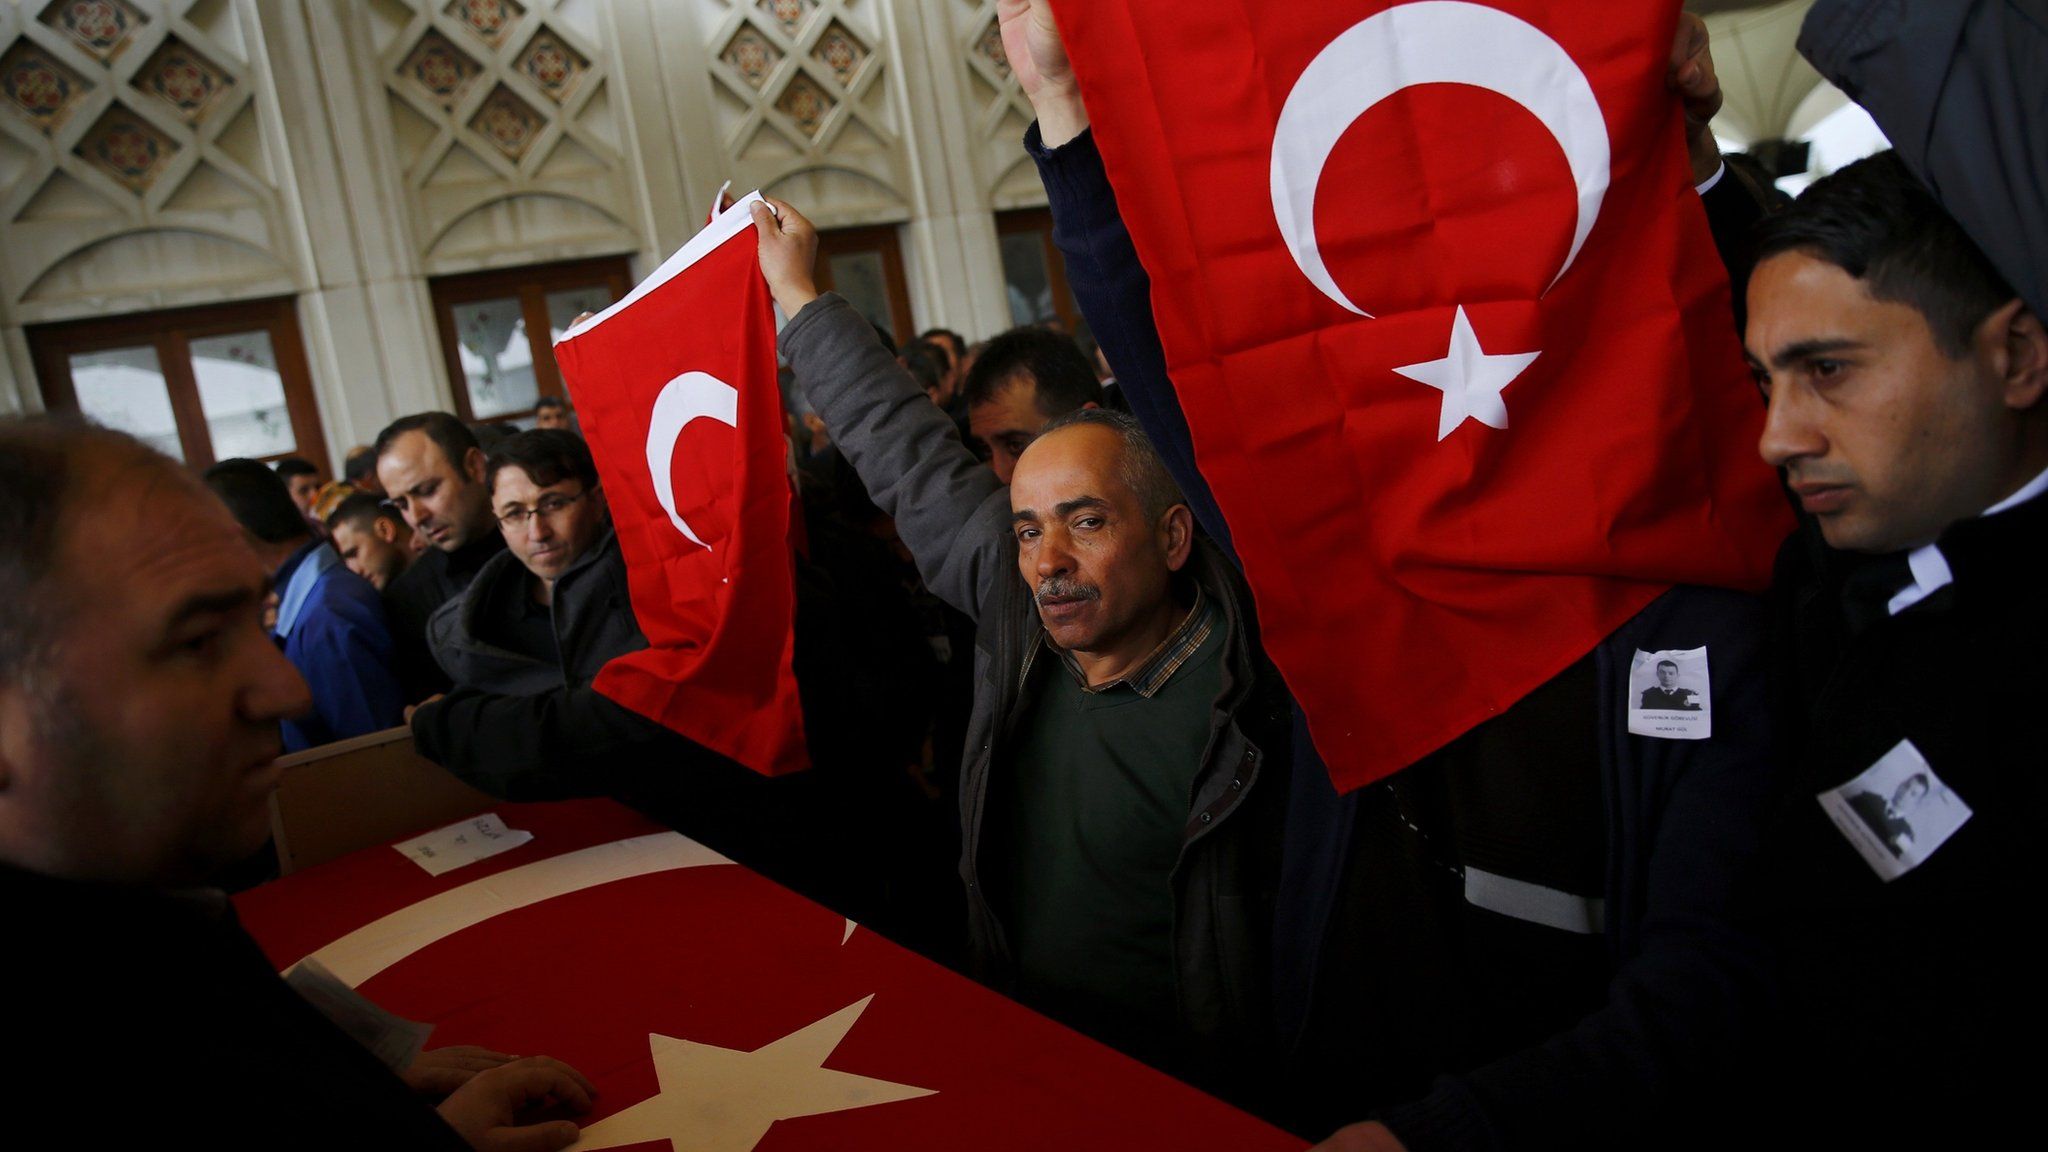 Turkish flags over coffin of bombing victim - 14 March